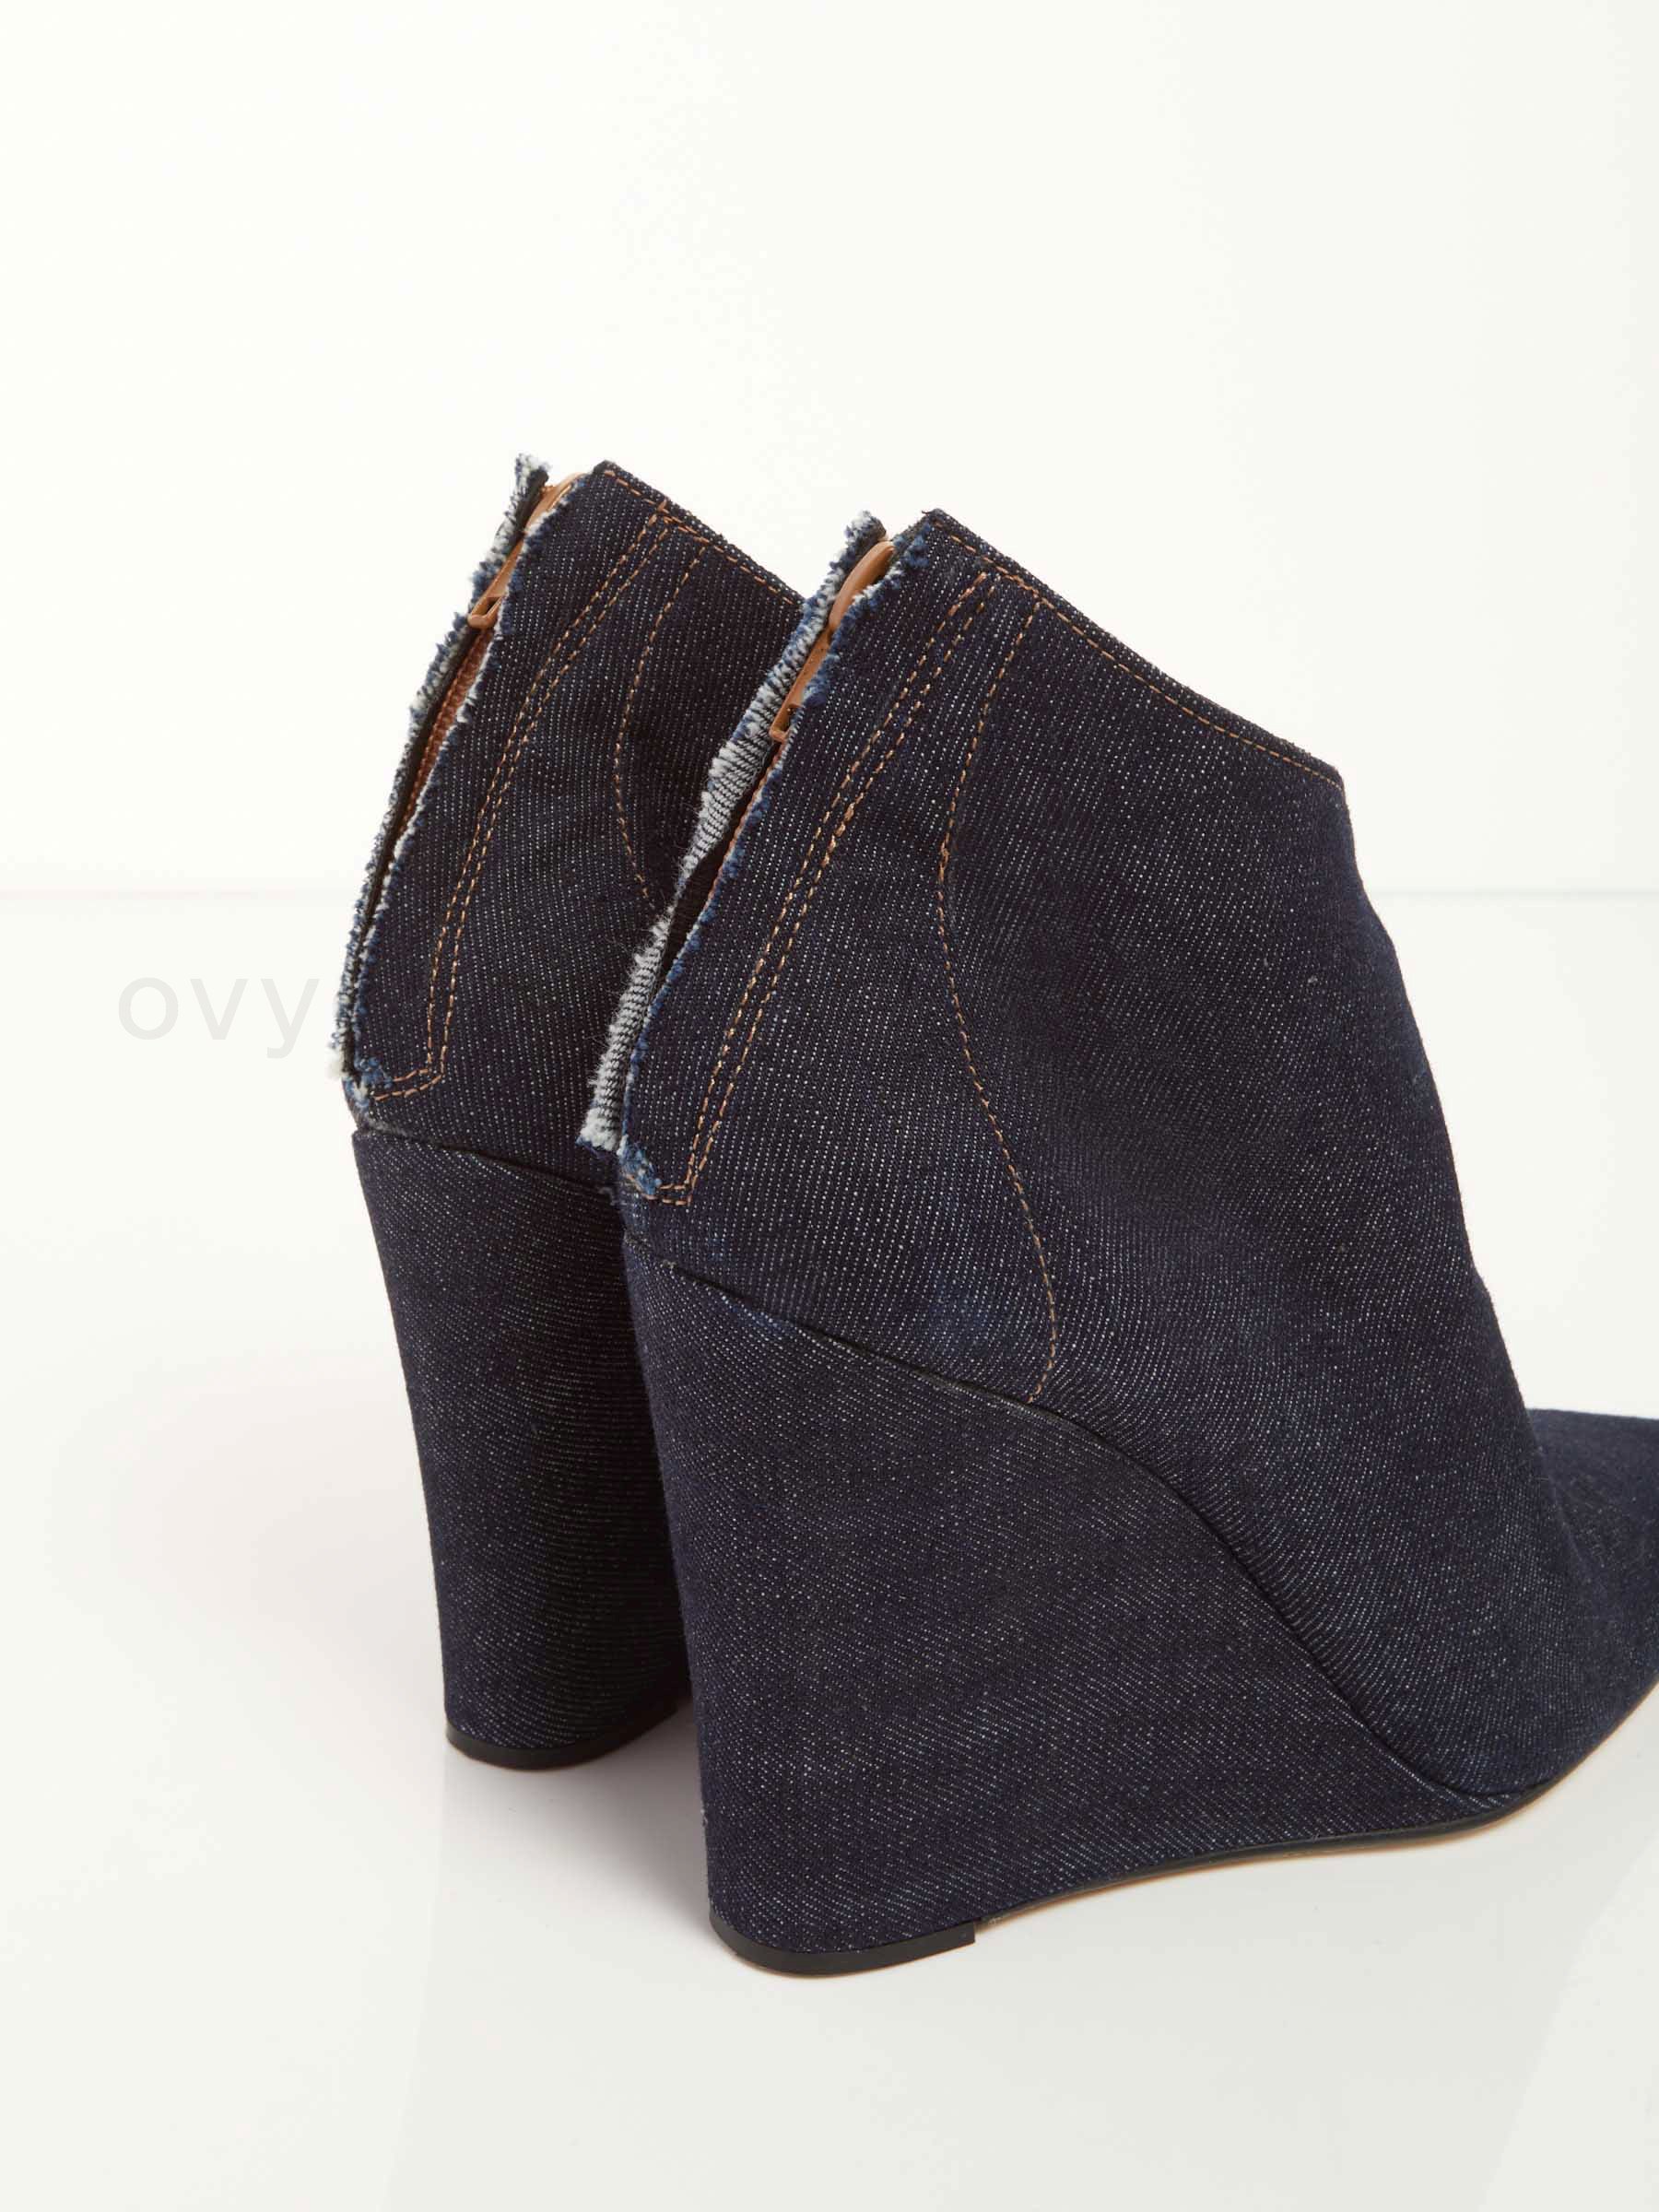 Al 70 Wedge Jeans Ankle Boots F0817885-0471